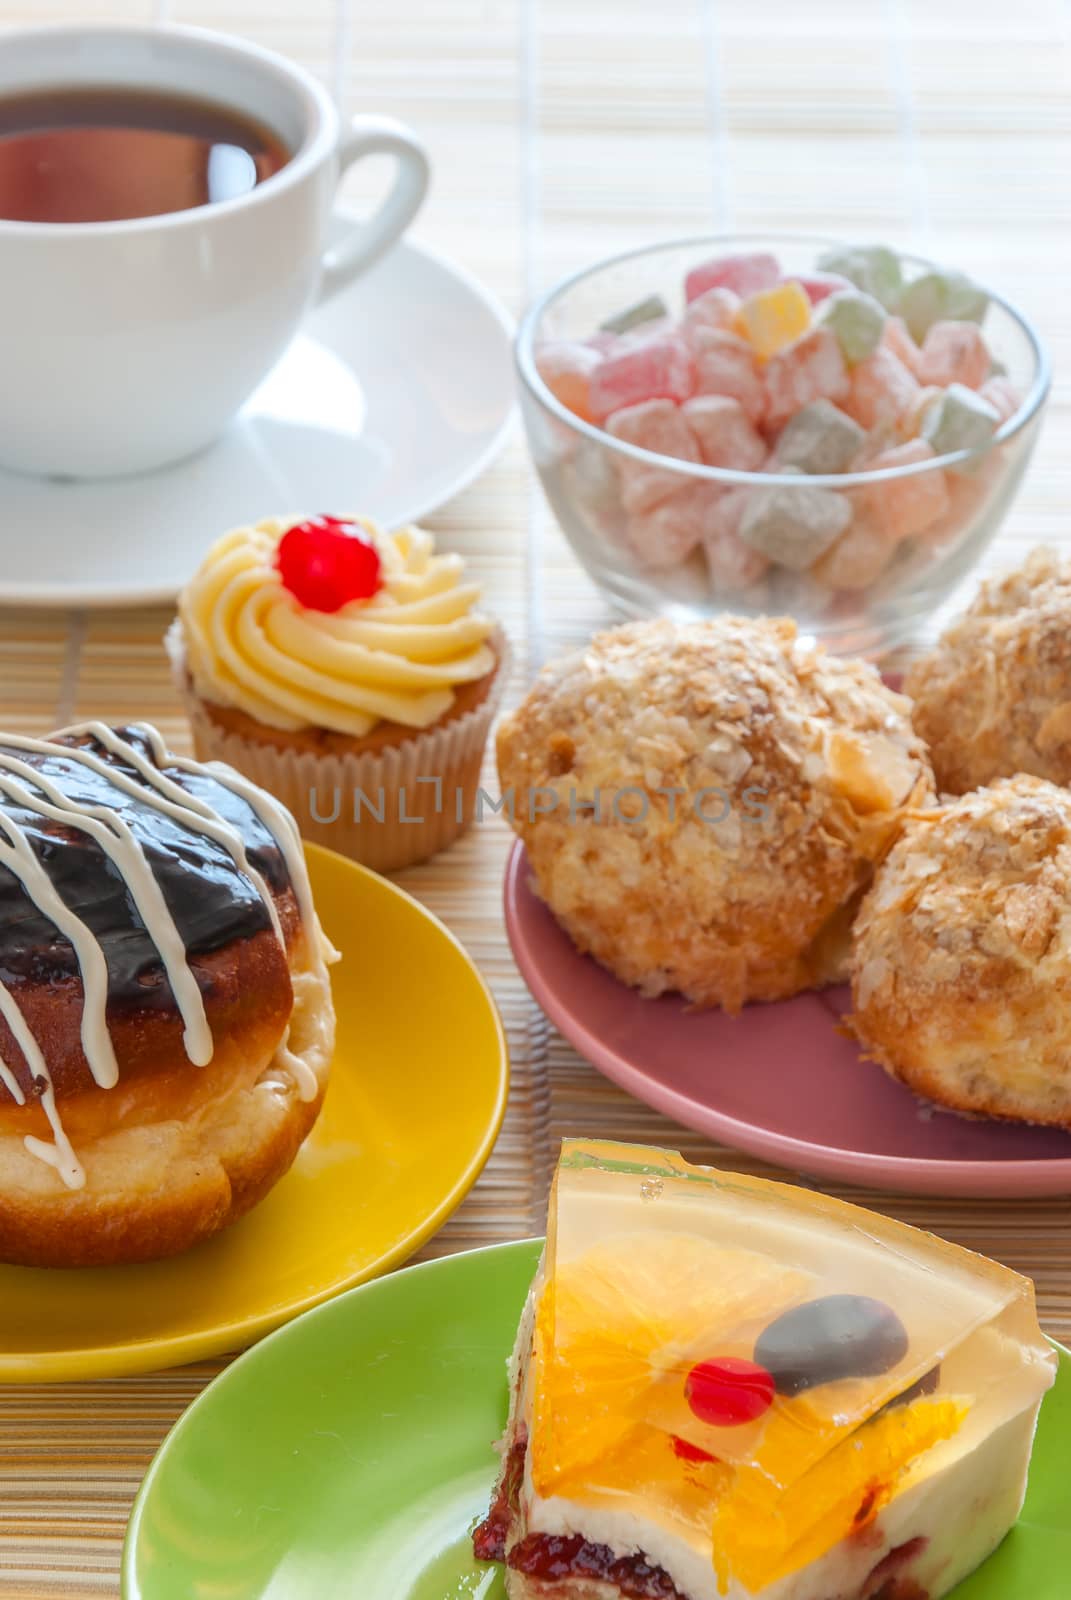 Tea, fresh cherry muffin, colorful delight, eclair and doughnut, various sweet dessert